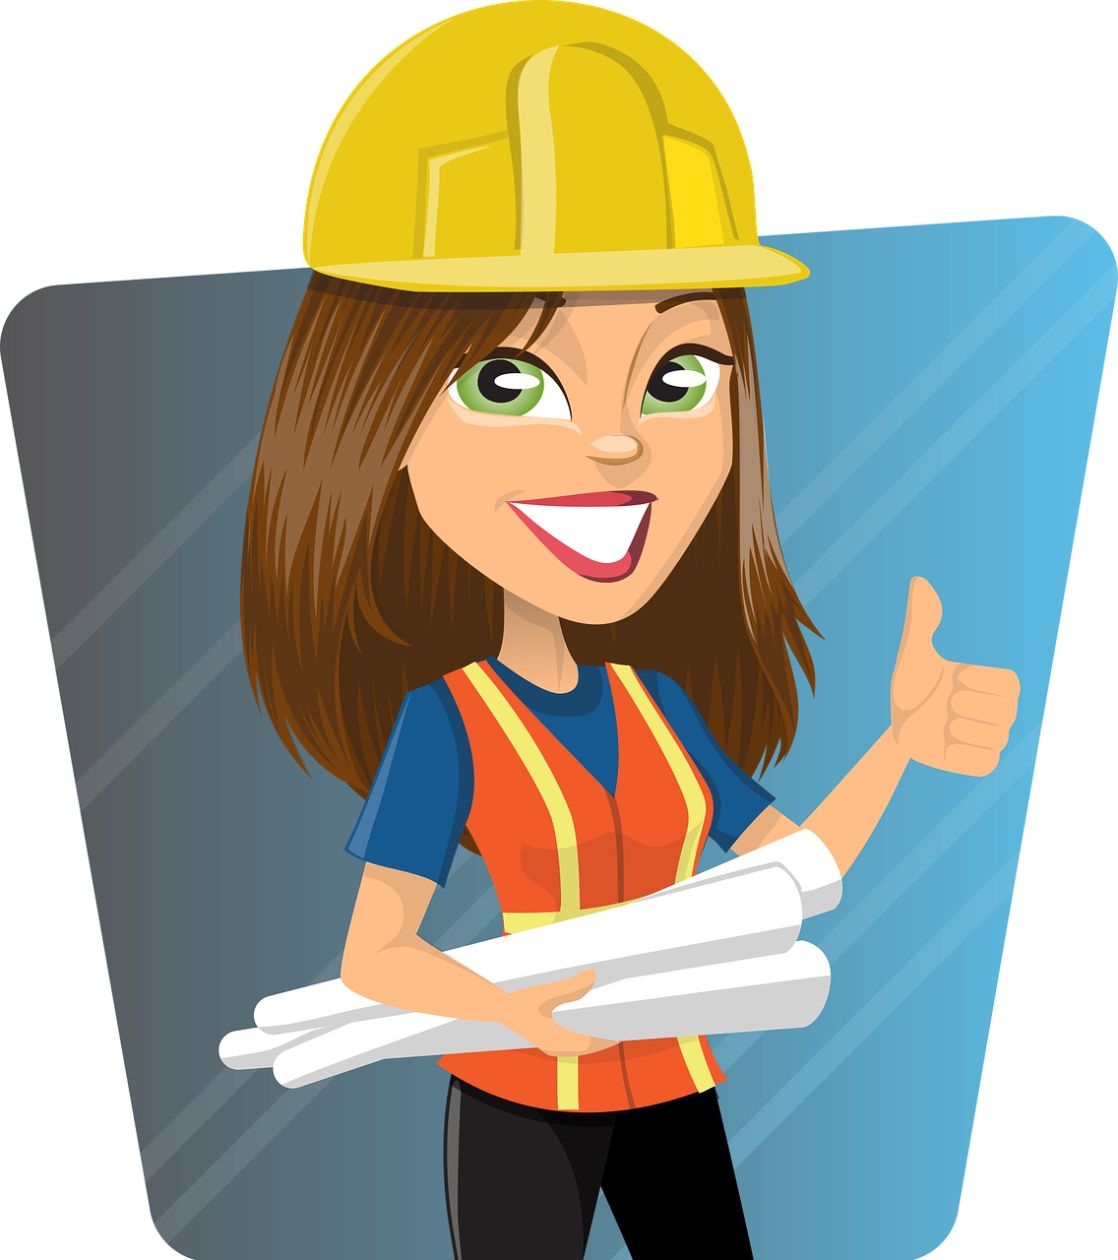 Smiling animated home builder with yellow hat